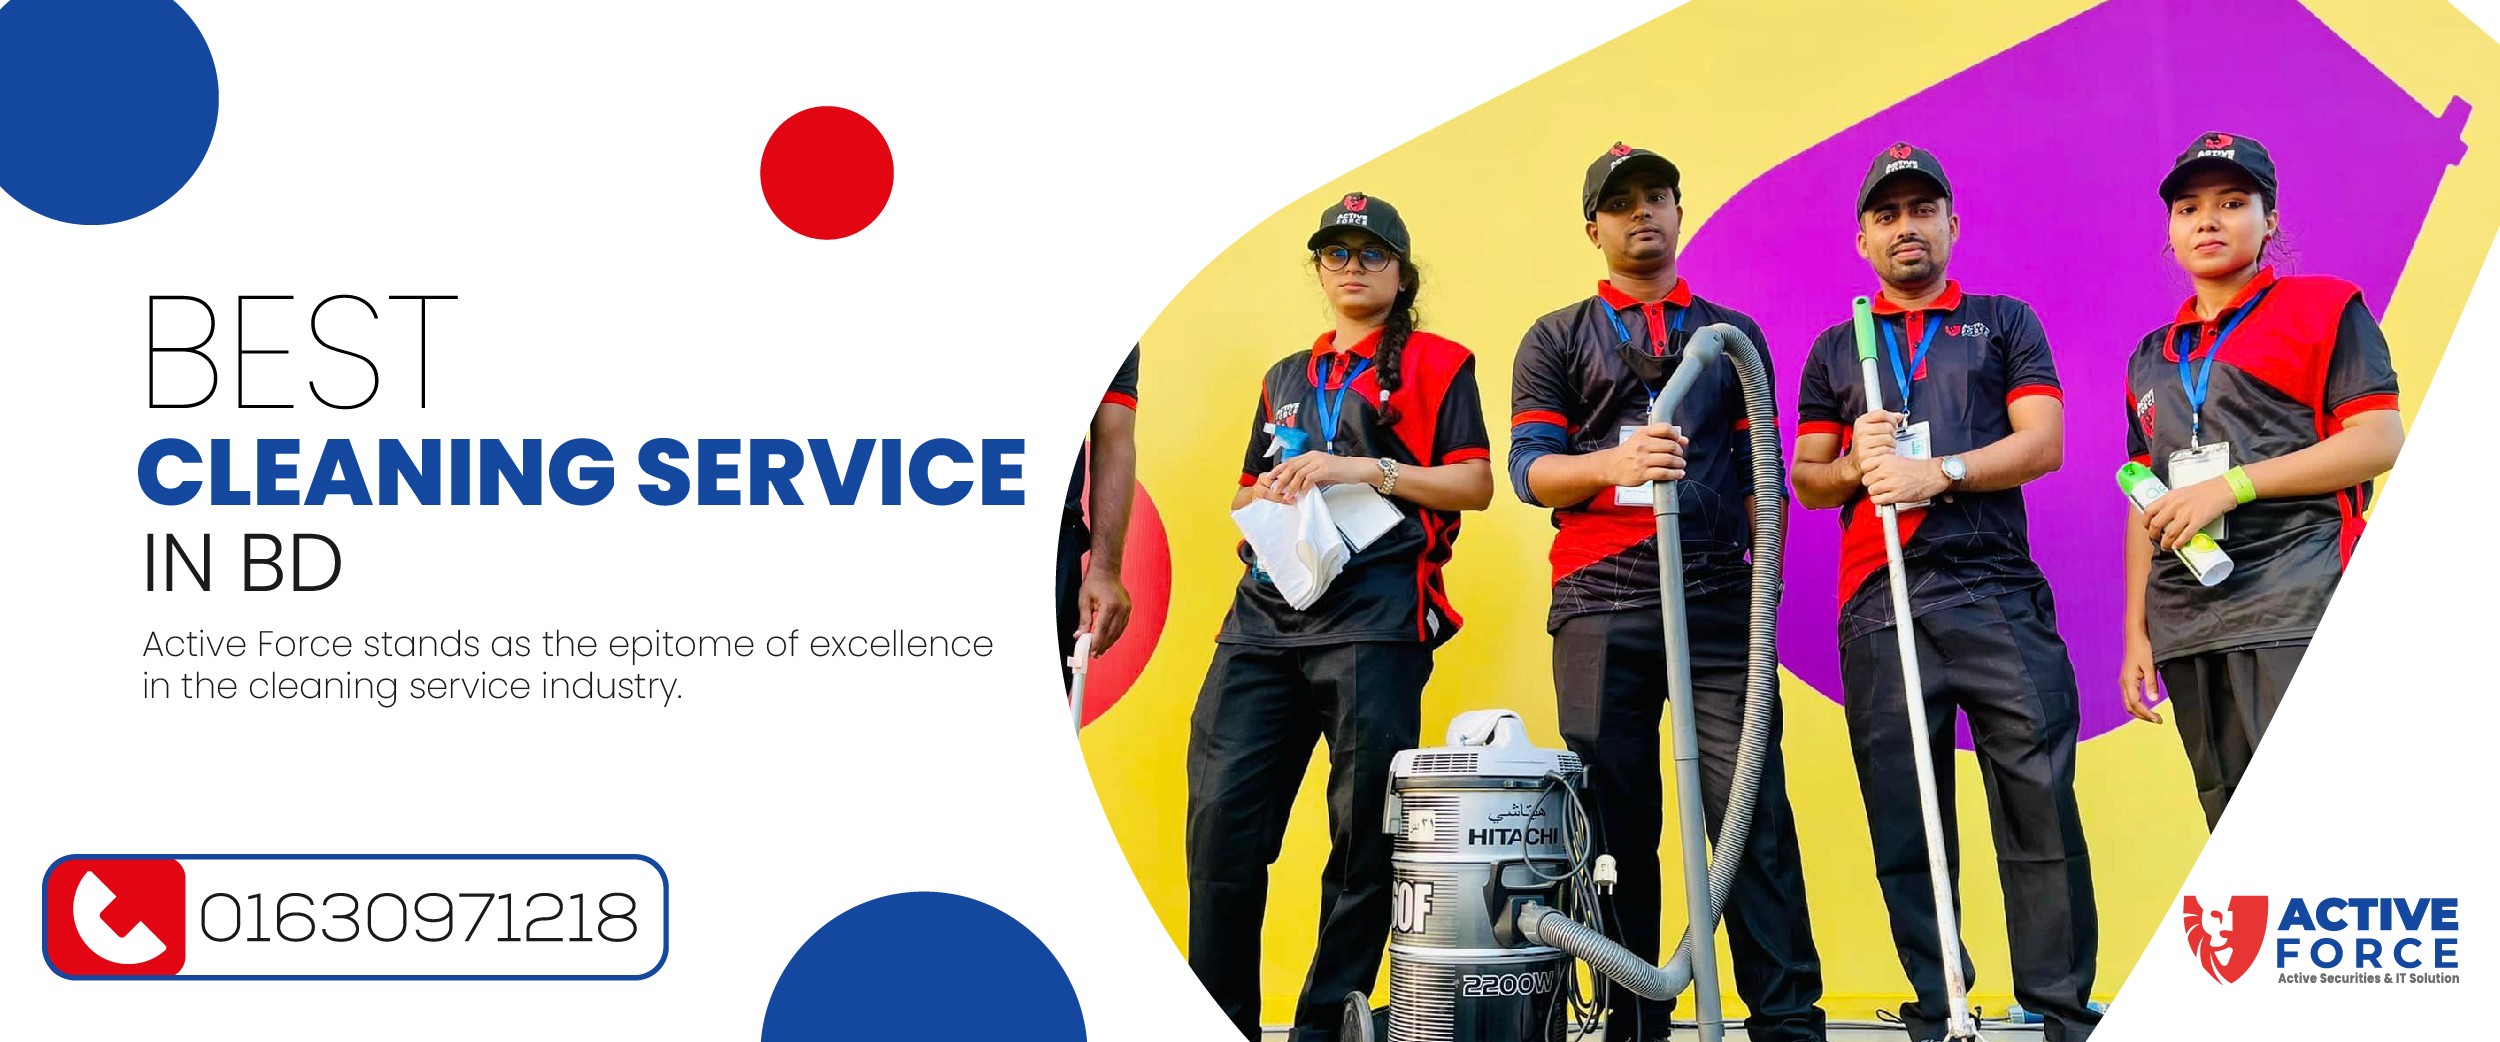 Best Cleaning Service in BD | Active Force